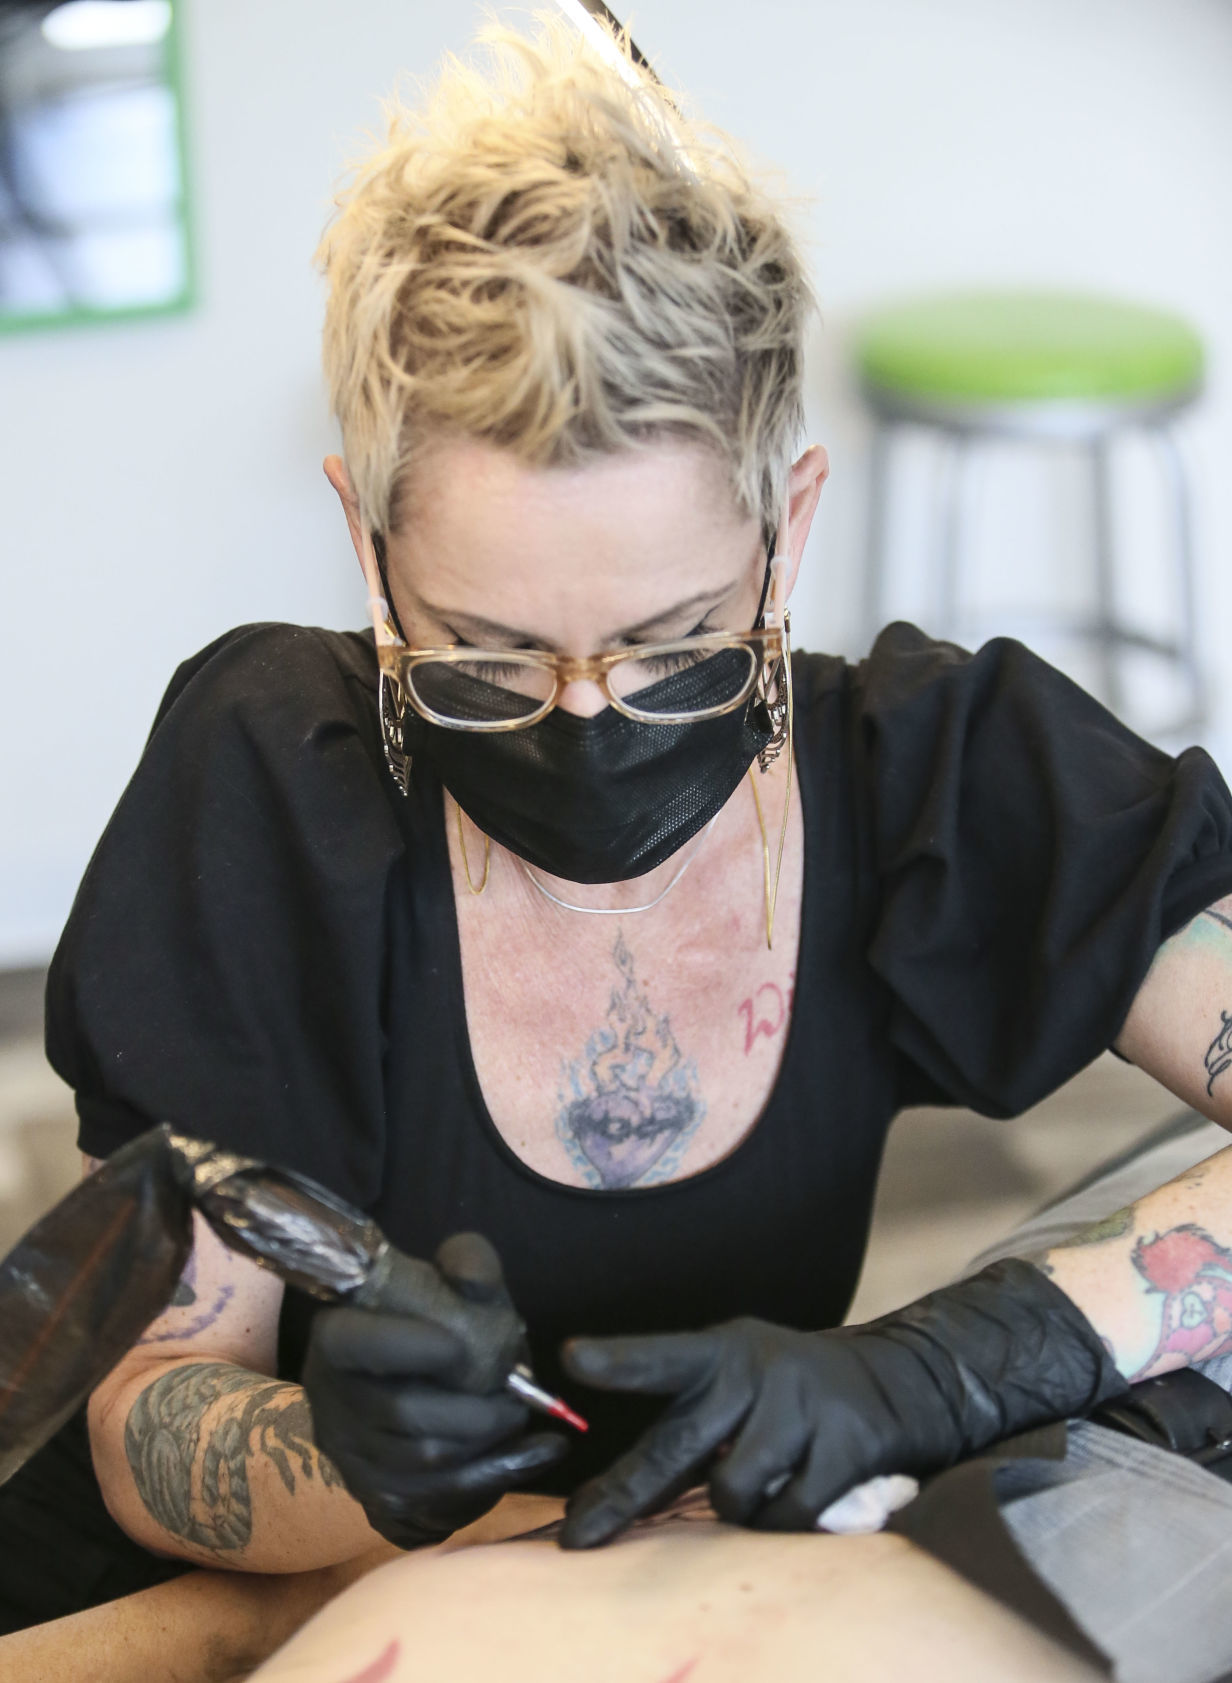 Tattoo tips that you won't wanna miss out 😌 | Gallery posted by Rach31.0 |  Lemon8